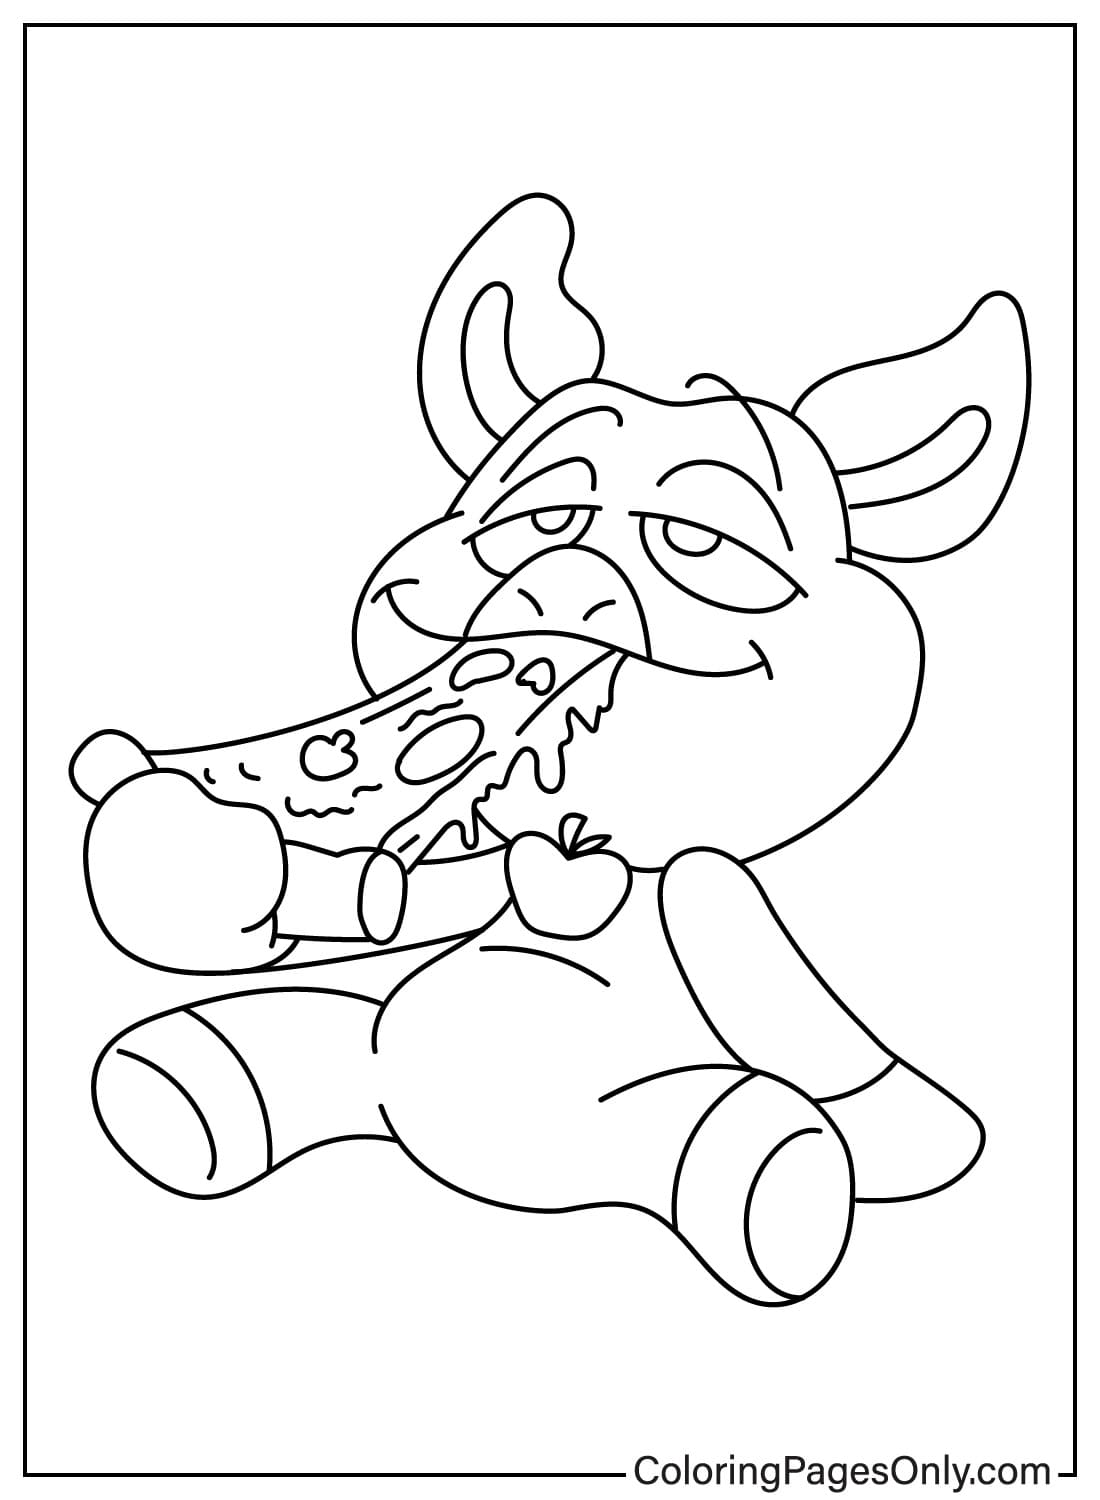 PickyPiggy Coloring Page Eating Pizza from PickyPiggy